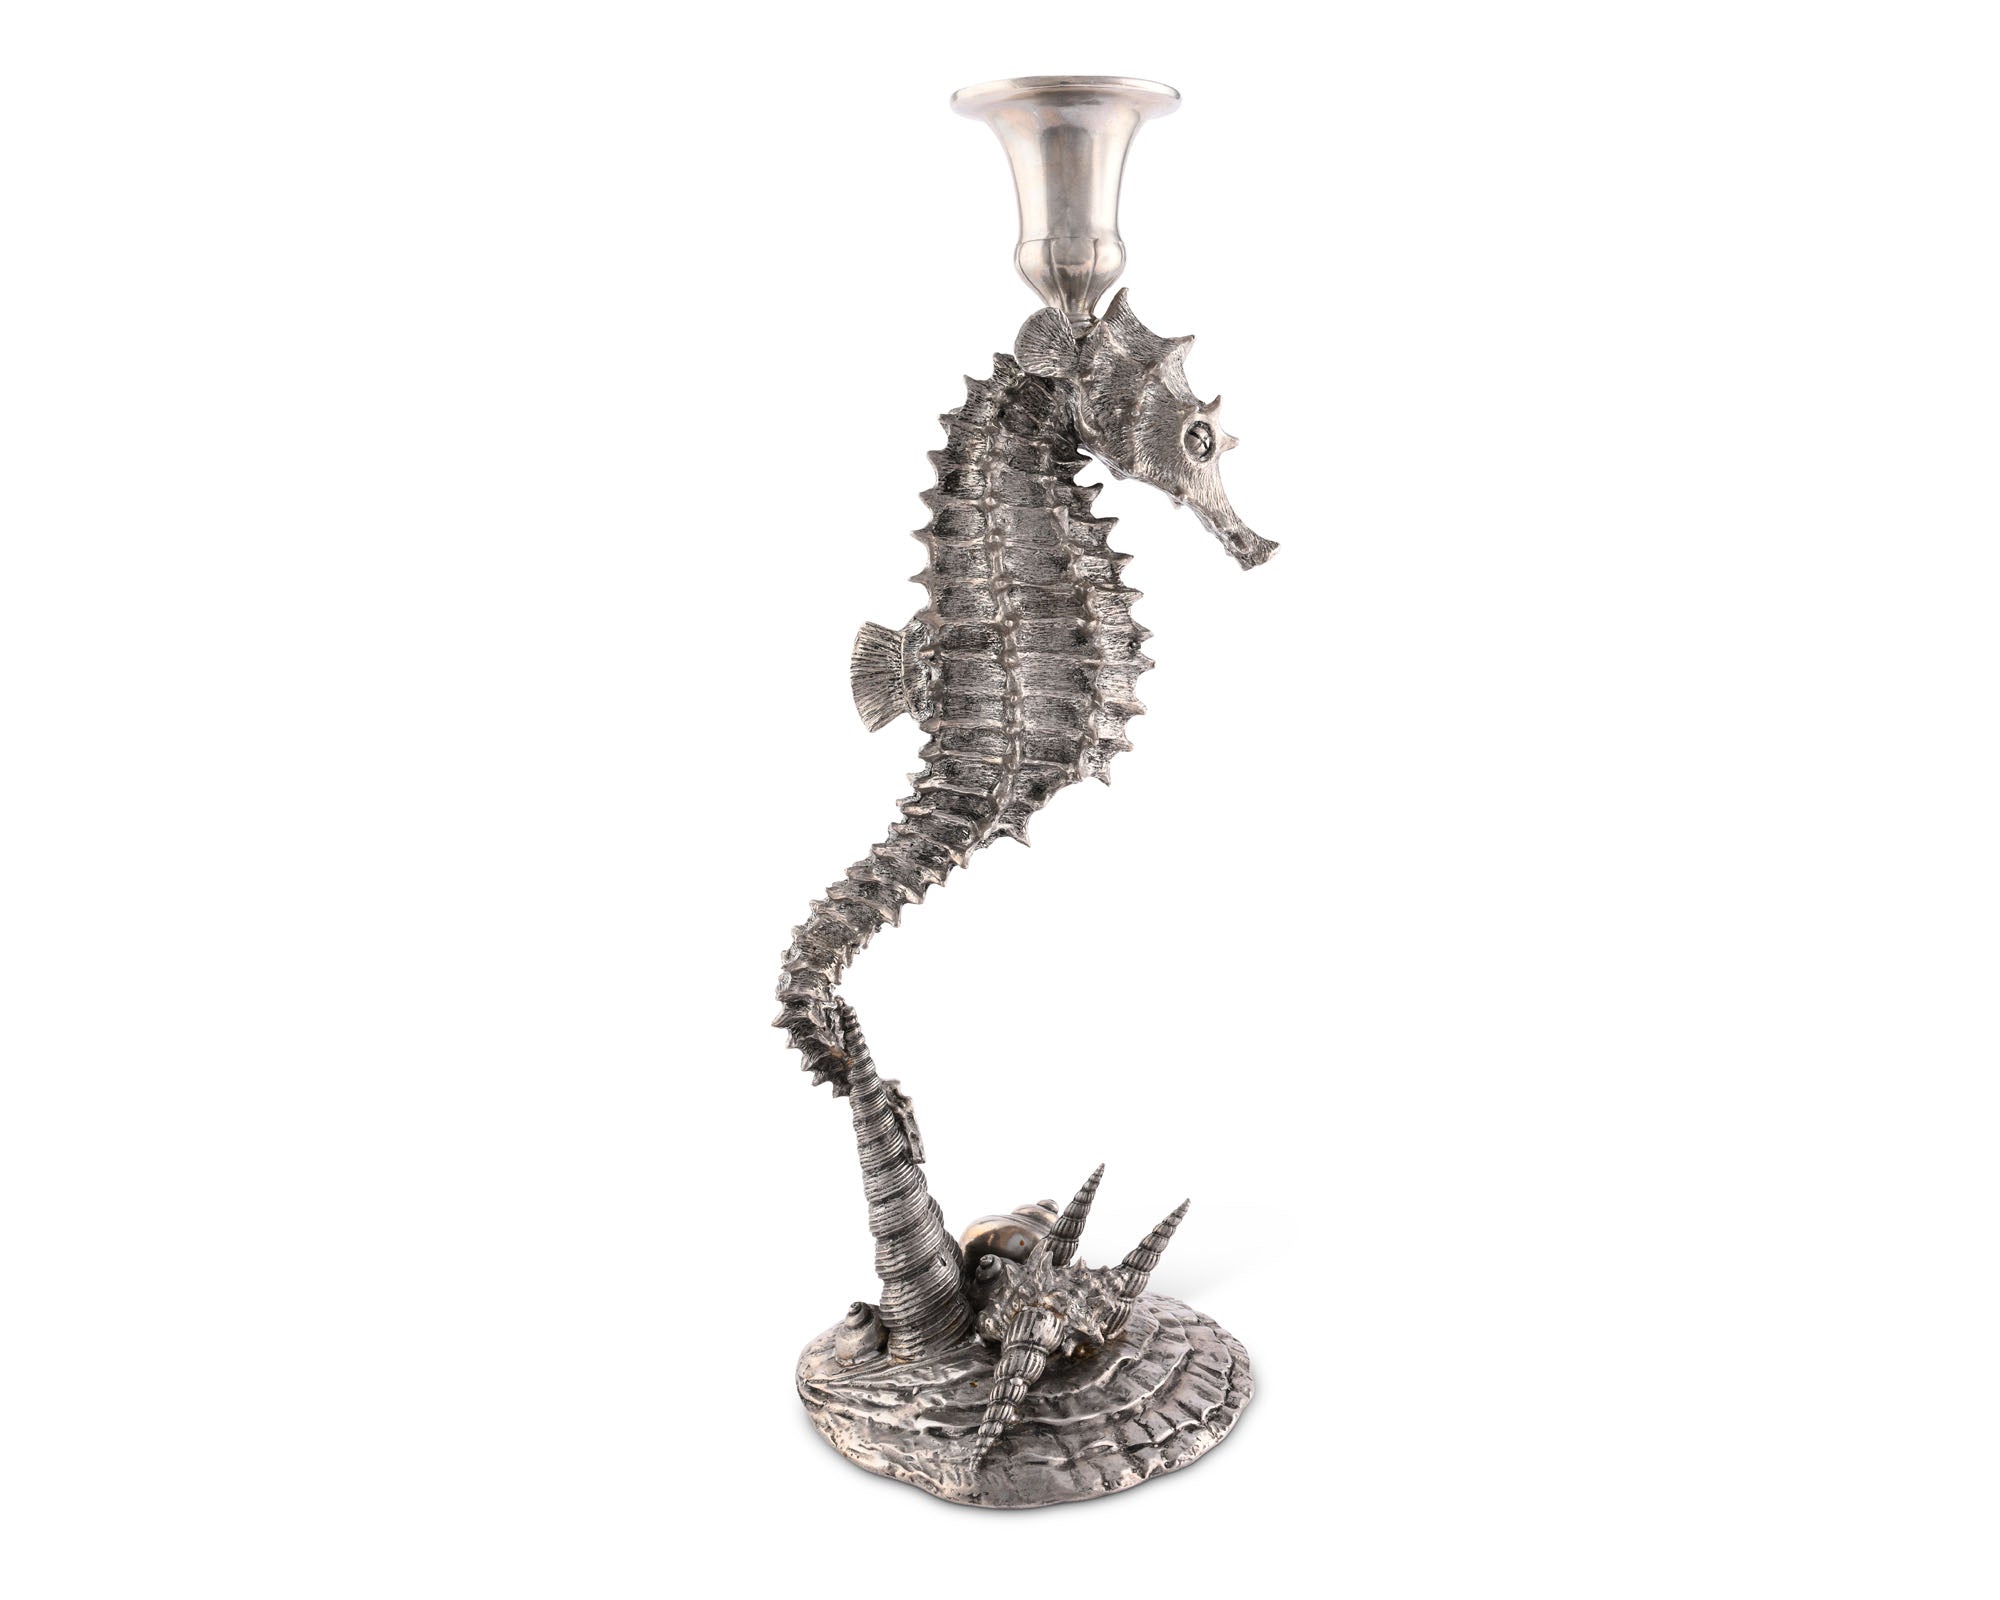 Vagabond House Pewter Seahorse Candlestick Product Image